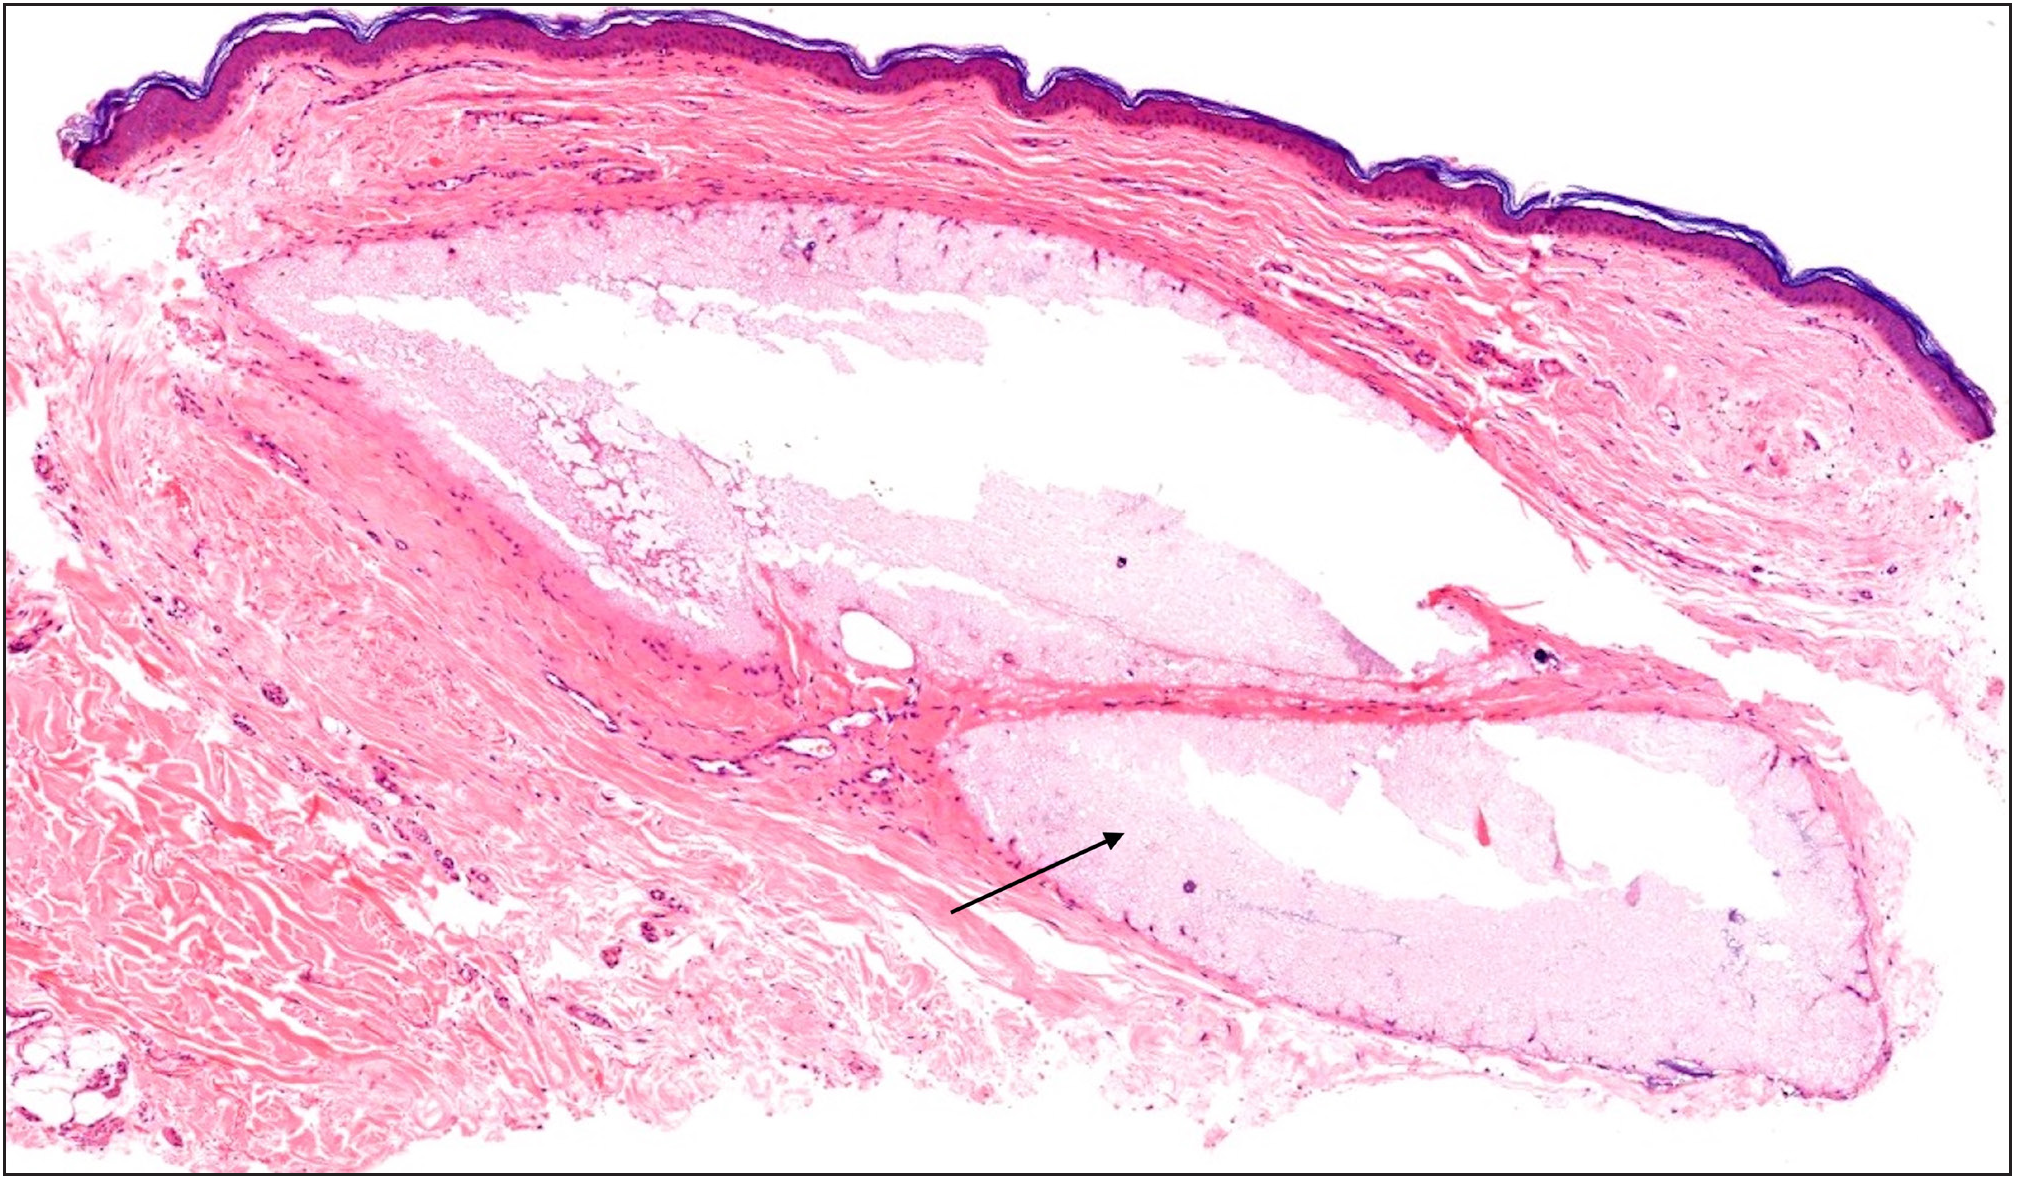 Deposition of well-circumscribed pools of lightly basophilic acellular, finely granular to amorphous mucin-like material (black arrow) in upper dermis (Haematoxylin & Eosin, 100x).